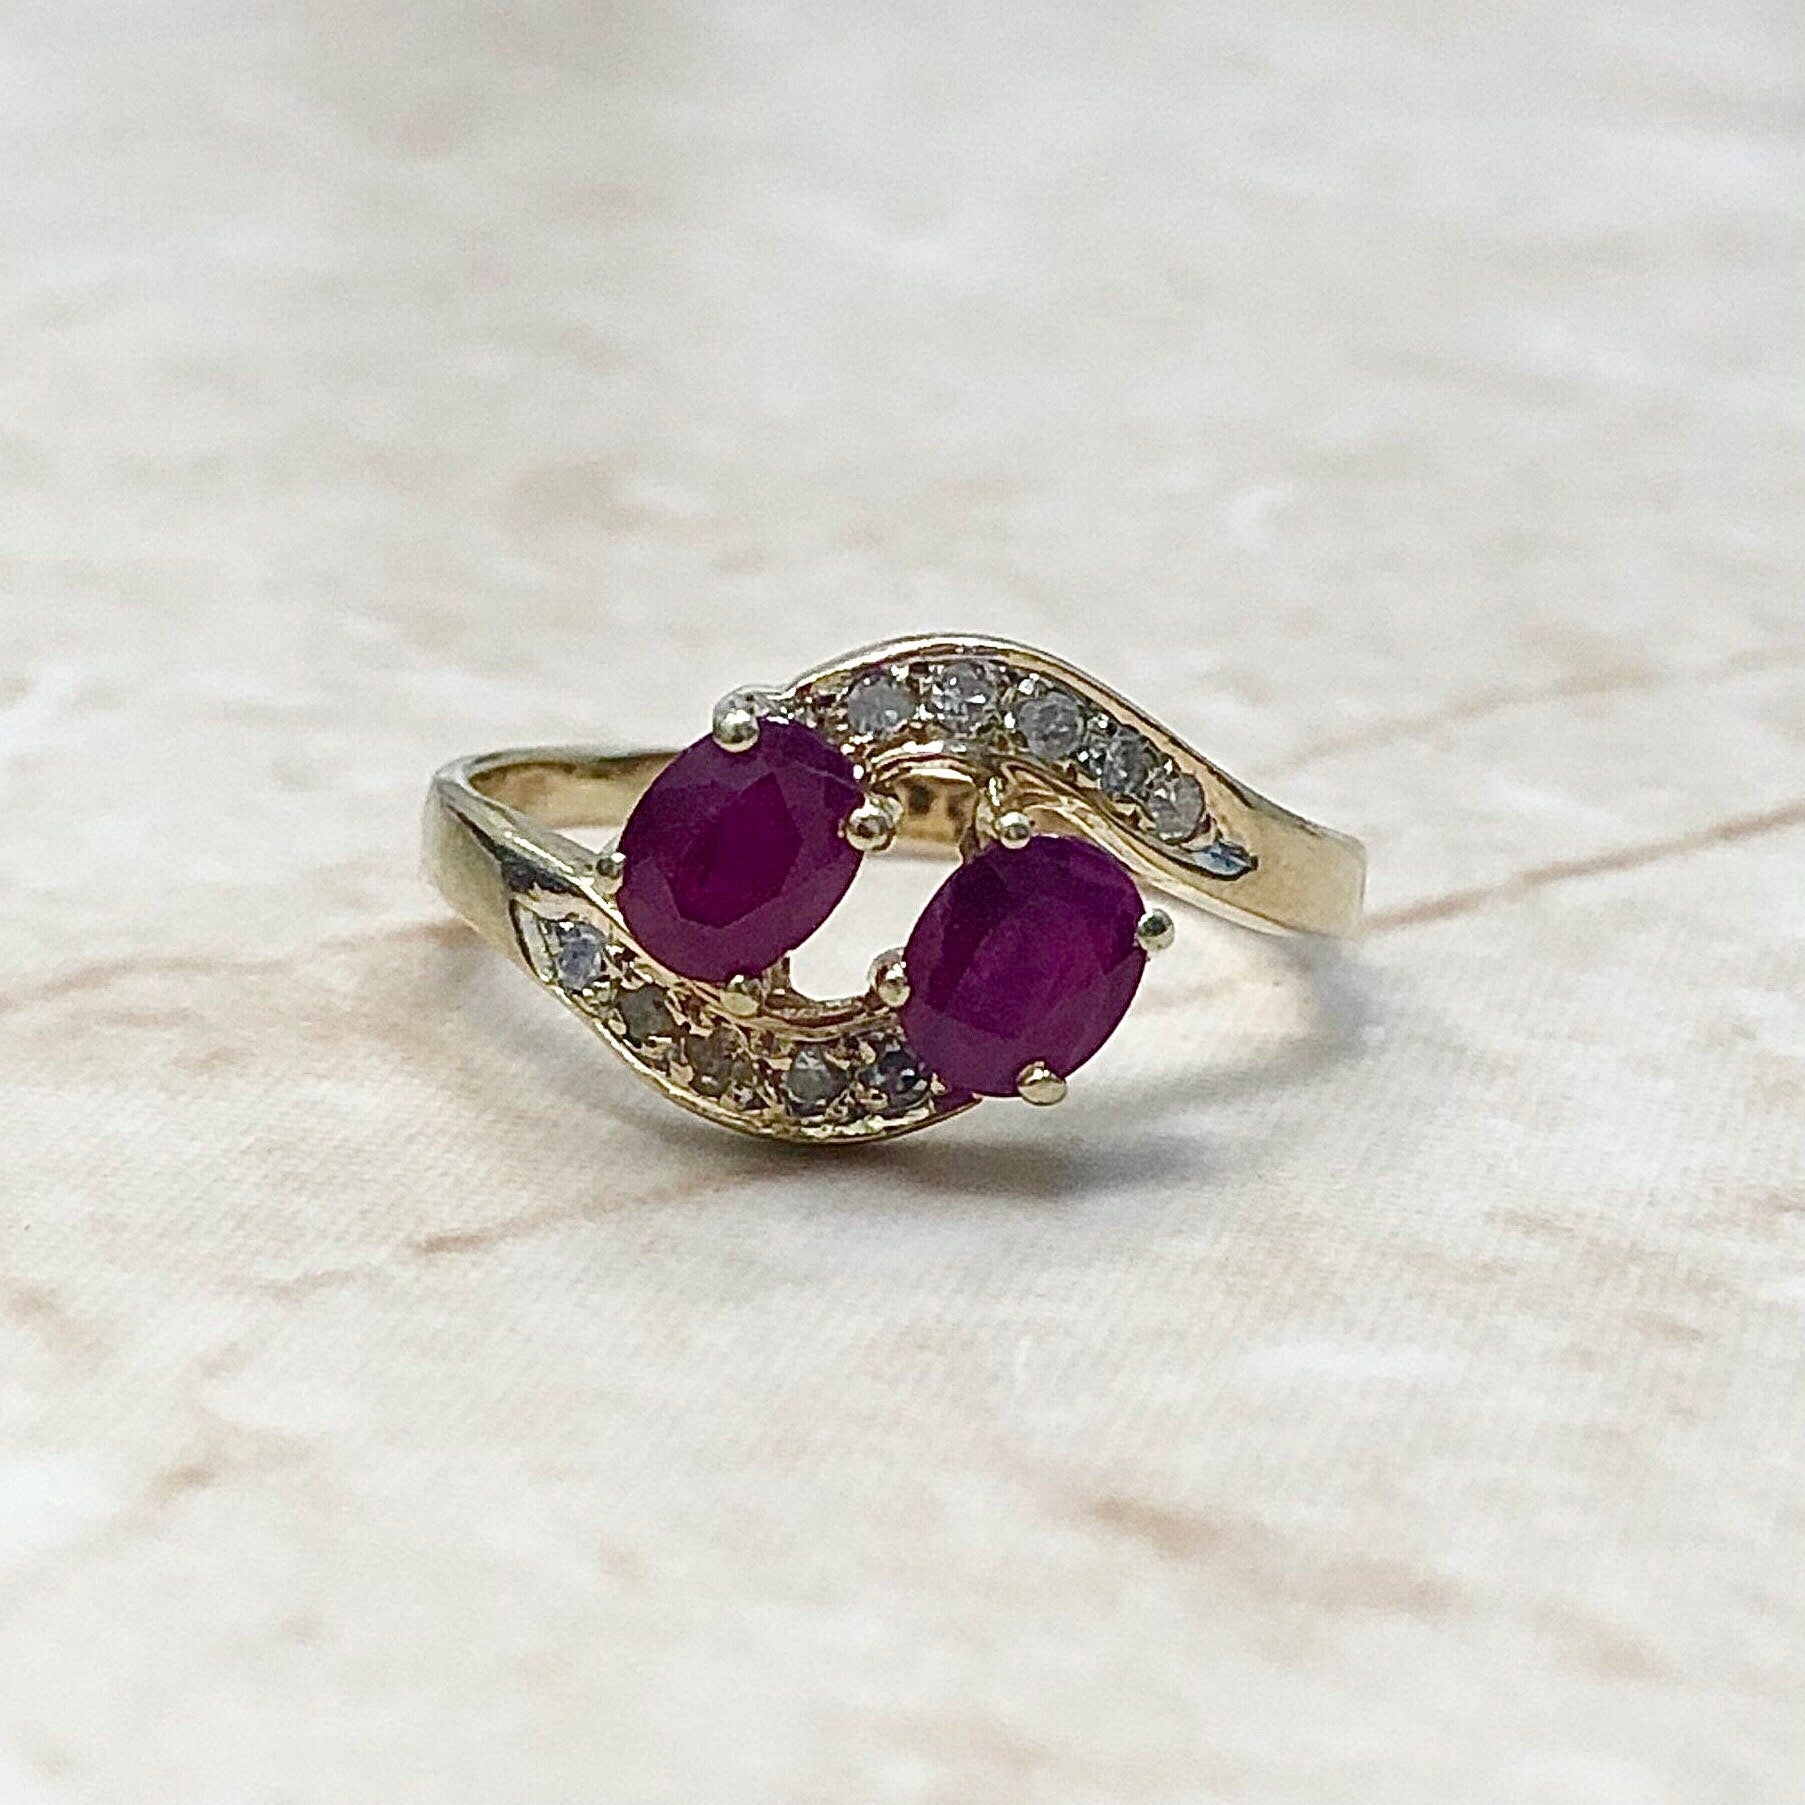 Natural Ruby & Diamond Toi Et Moi Ring - 14 Karat Yellow Gold - Bypass Cocktail Ring - July Birthstone - Anniversary Ring - Promise Ring